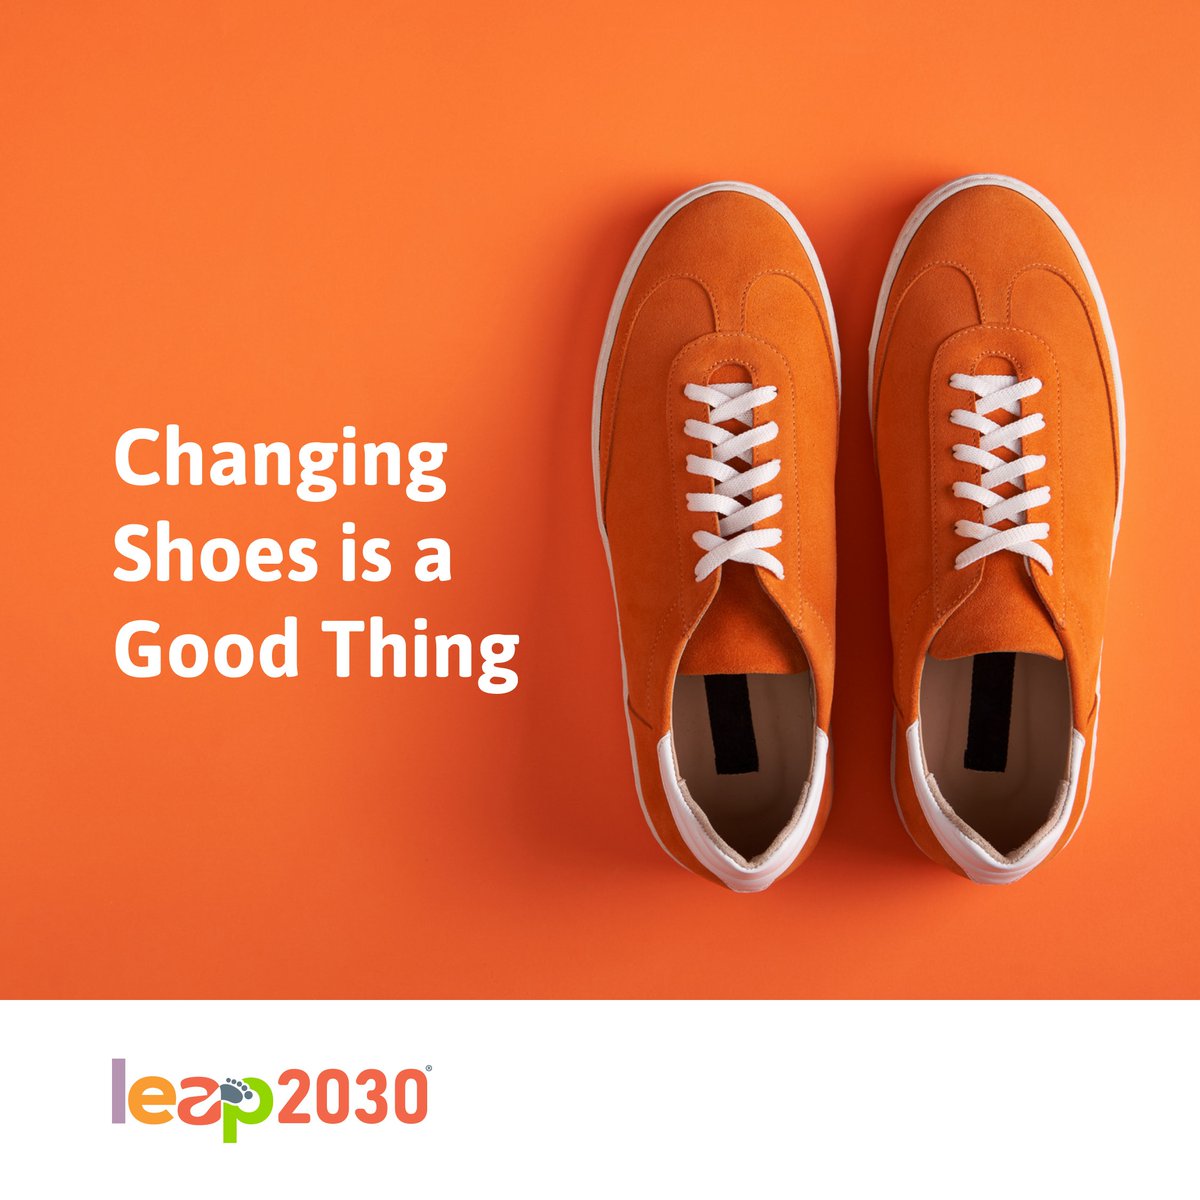 Many people keep shoes longer than is wise, and people with diabetes may have grown accustomed to poorly fitting shoes due to neuropathy. Replace shoes regularly to ensure proper fit and keep your feet as long as possible!

#LEAP2030 #FootHealth #AmputationPrevention #LEAPtoge...